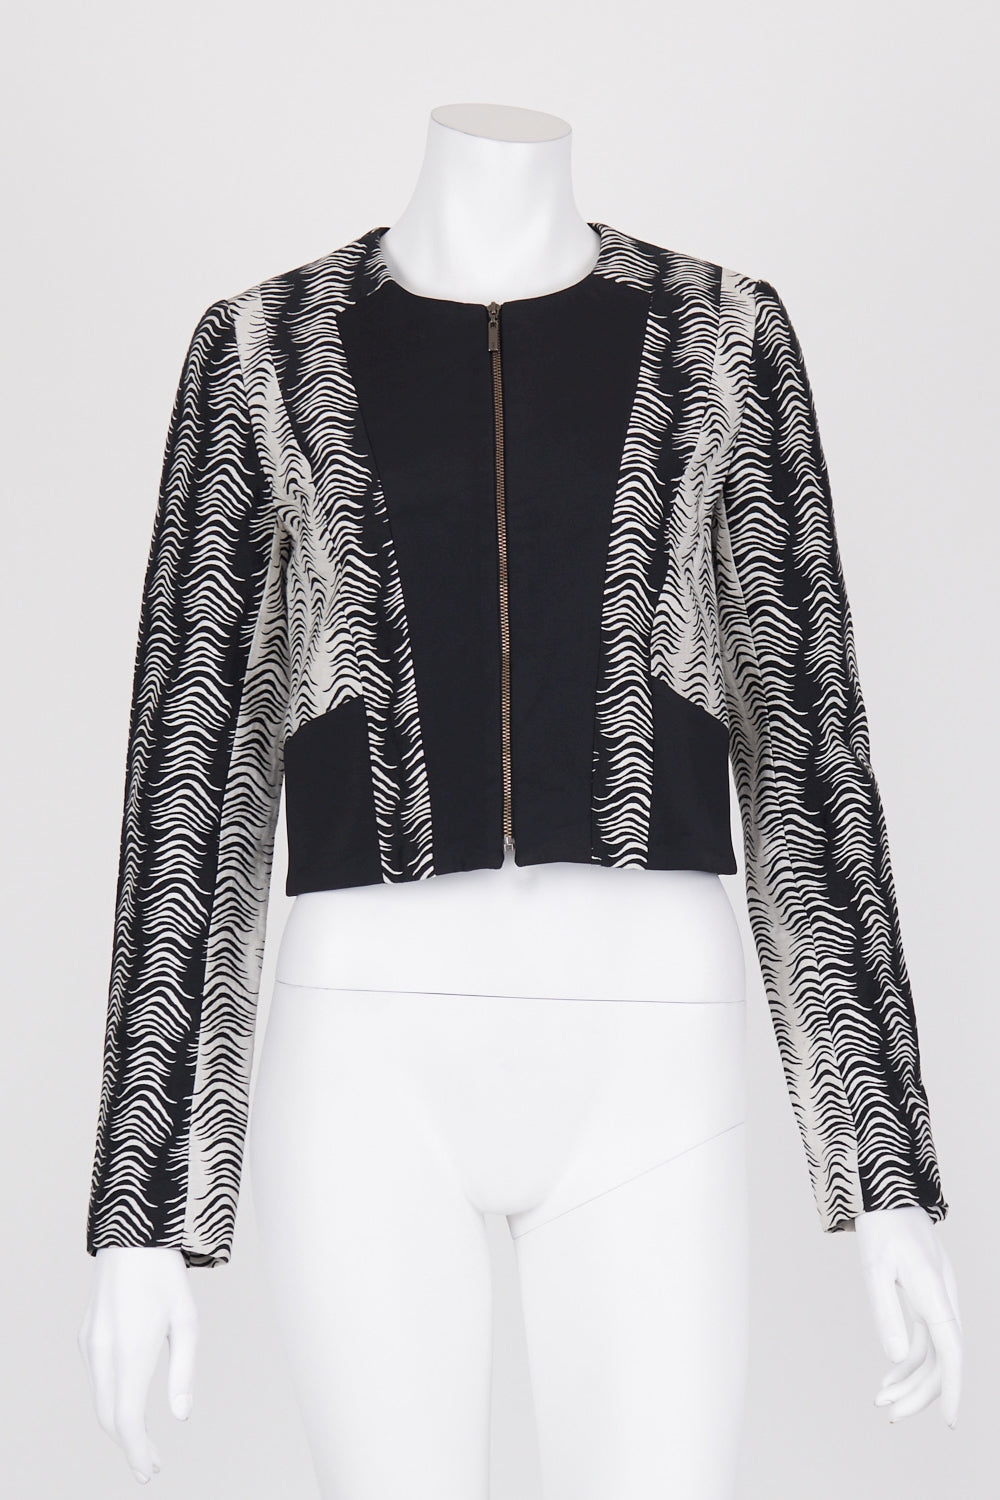 Cue Black And White Patterned Zip Front Jacket 8